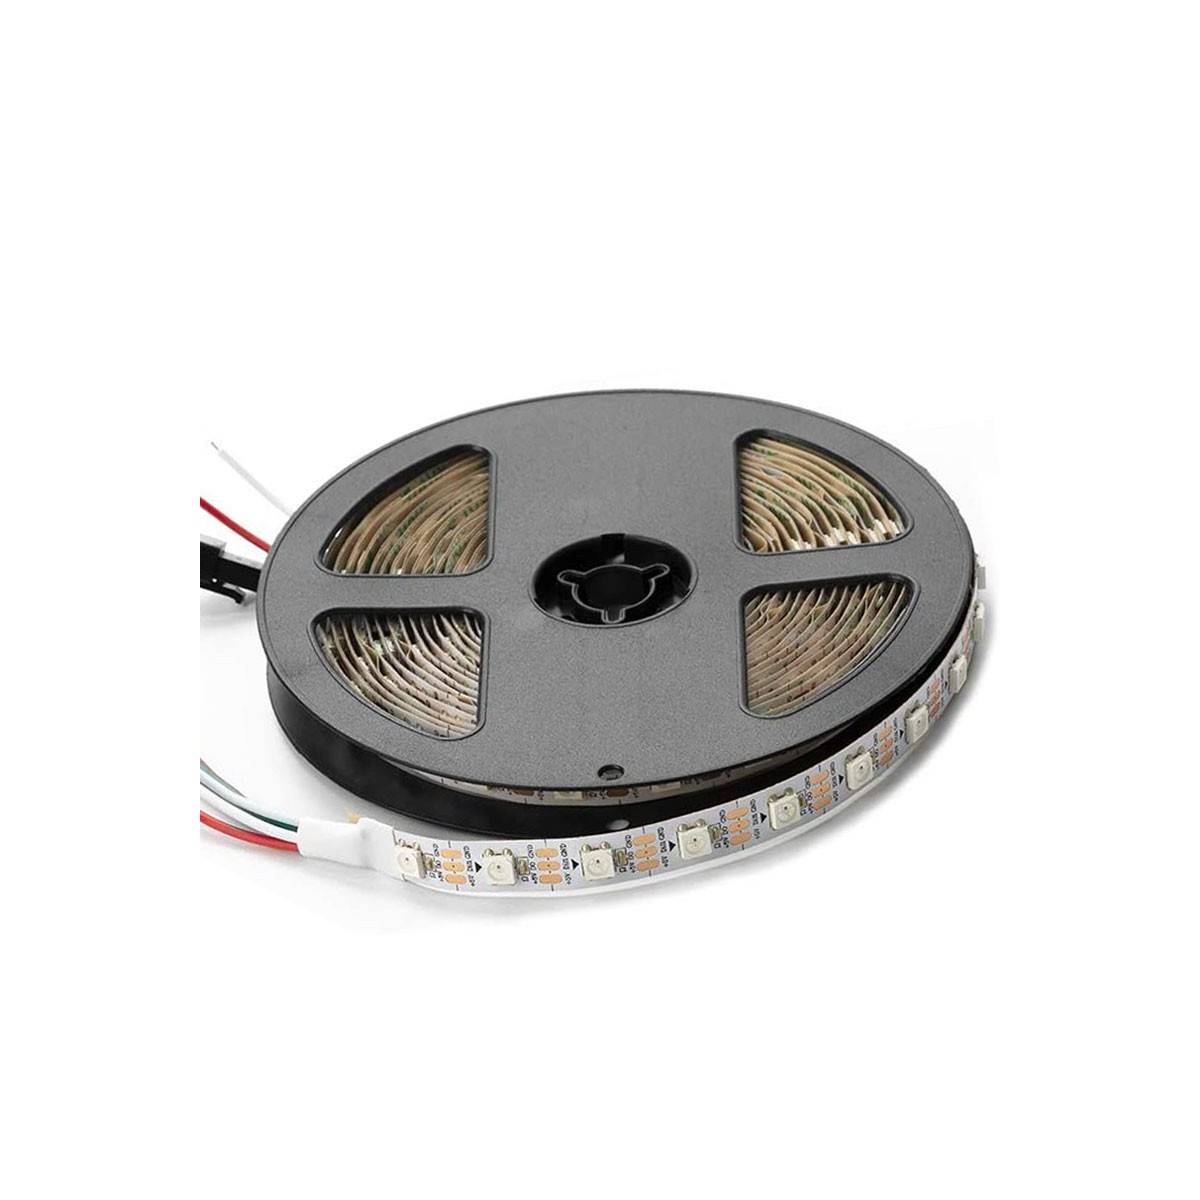 Smart LED Strips IC 5V/DC 5 meters IP20 60ch/m